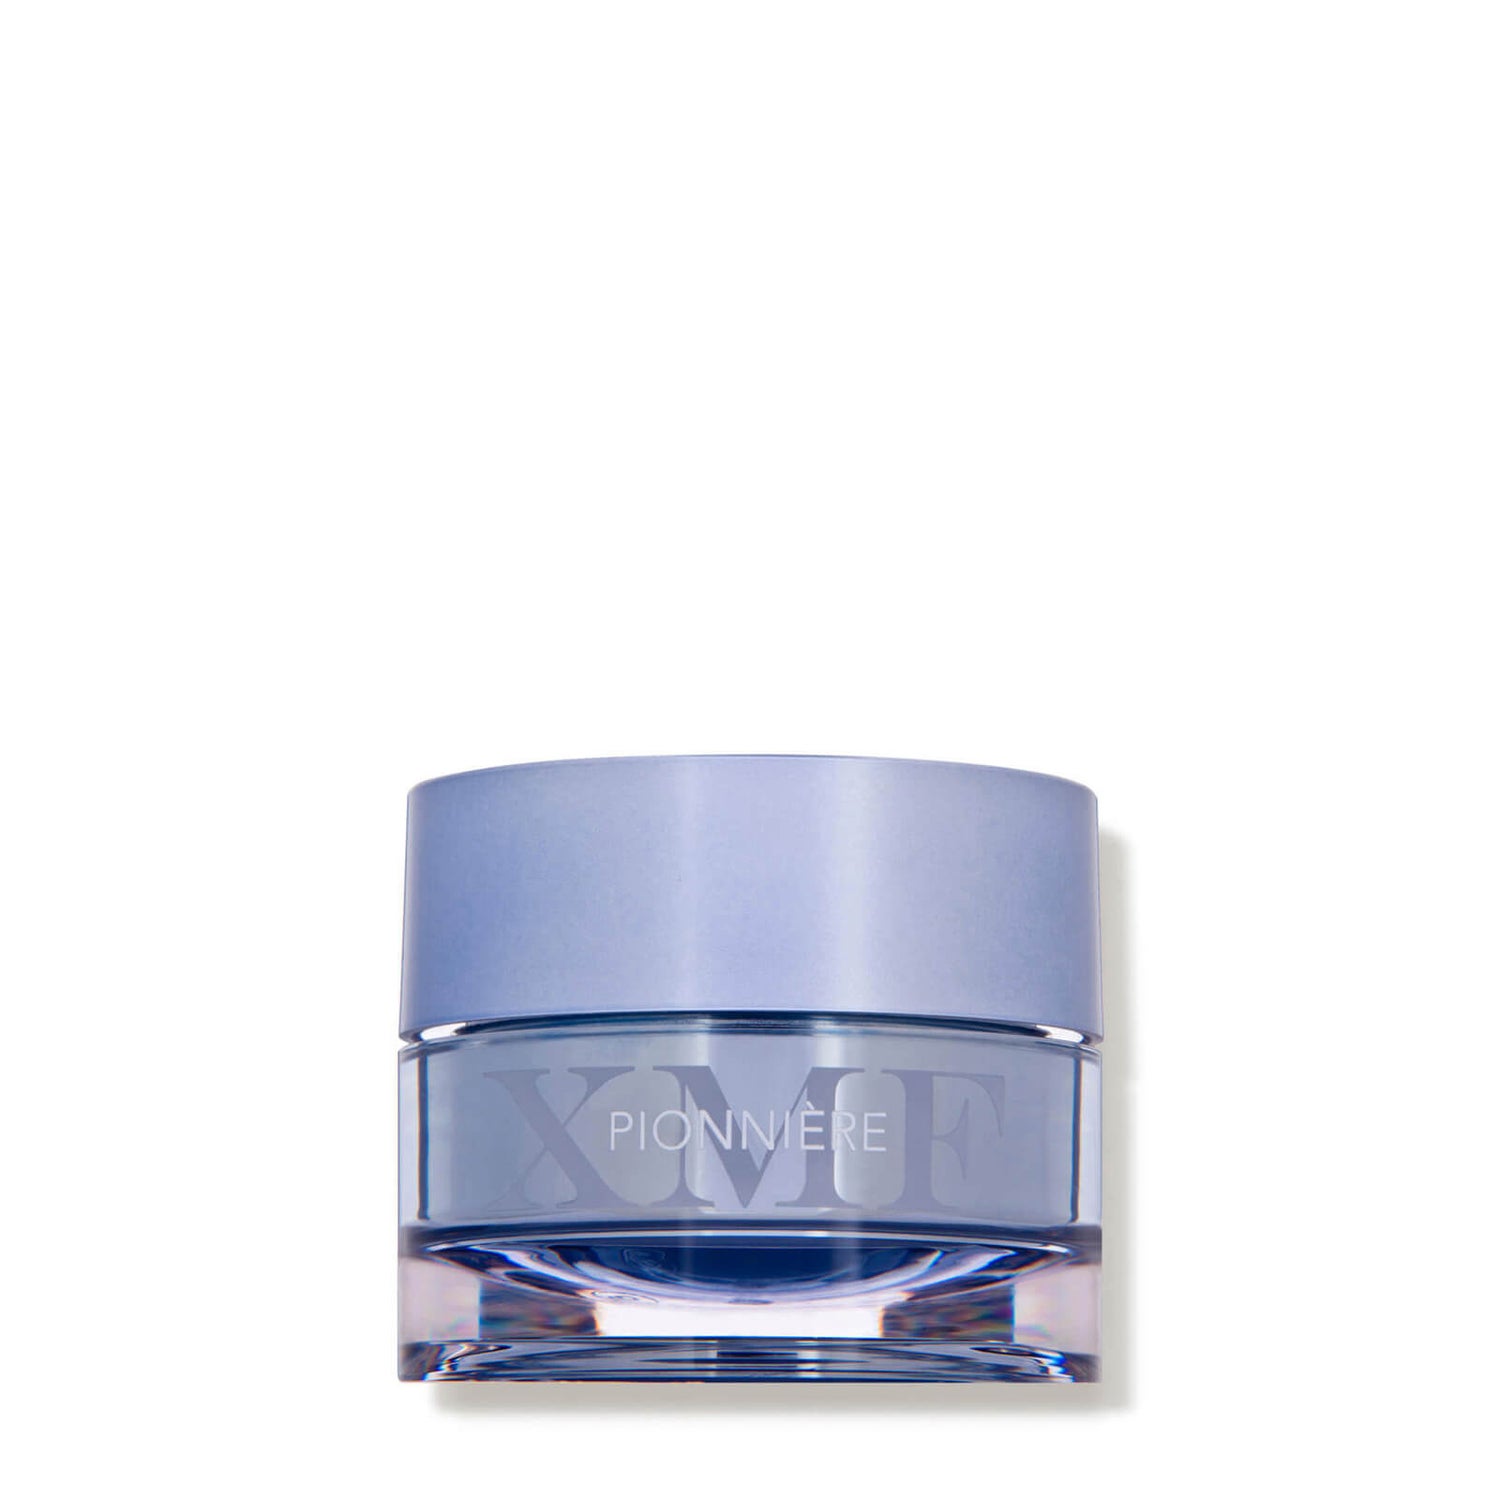 Phytomer XMF Pionniere Perfection Youth Cream (1.6 fl. oz.)